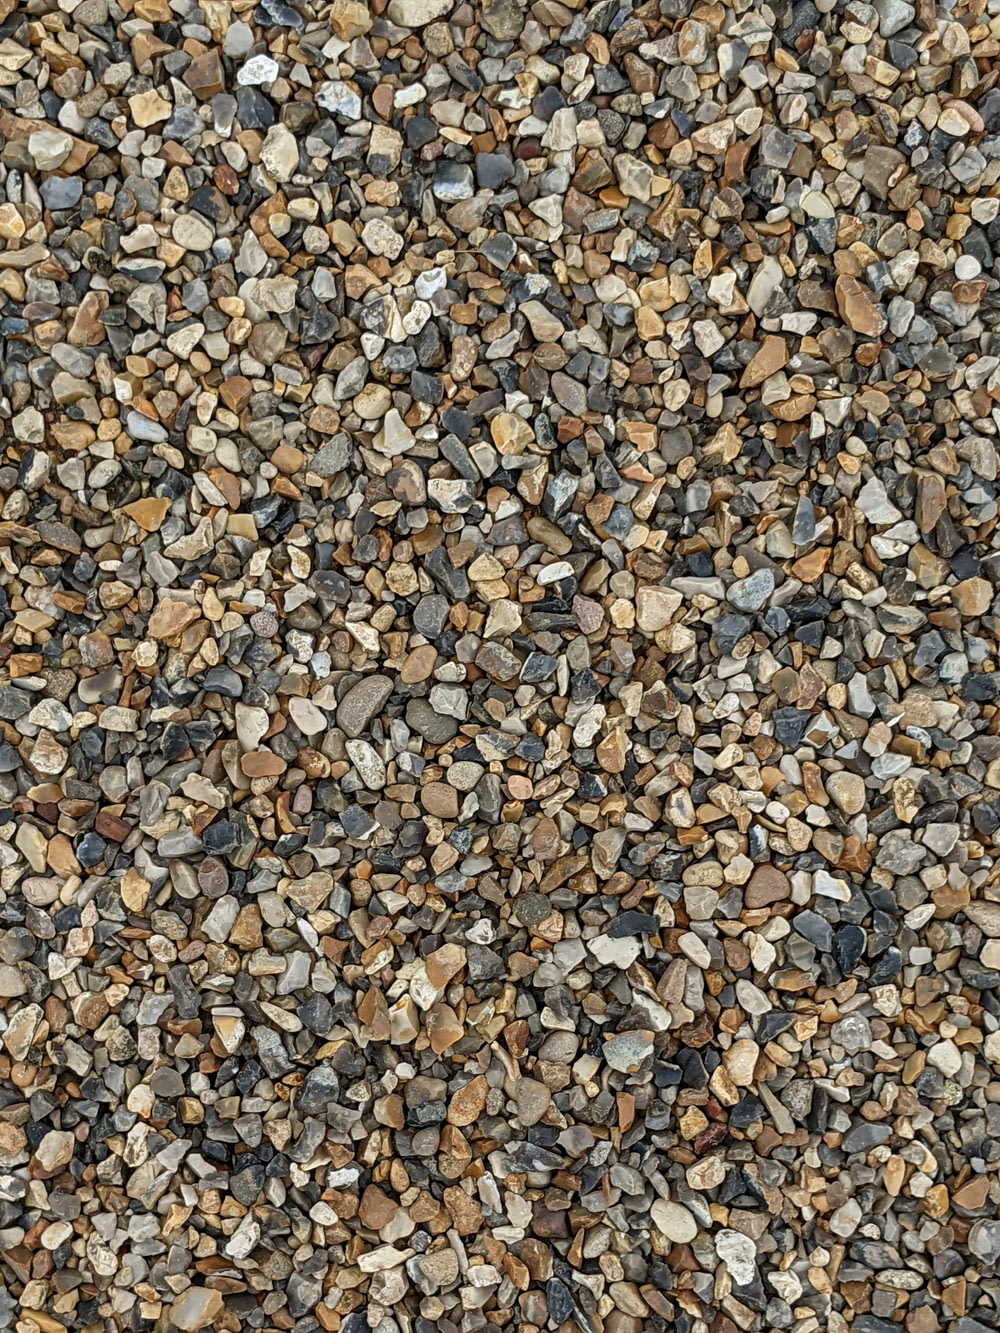 a close up of a pile of small rocks